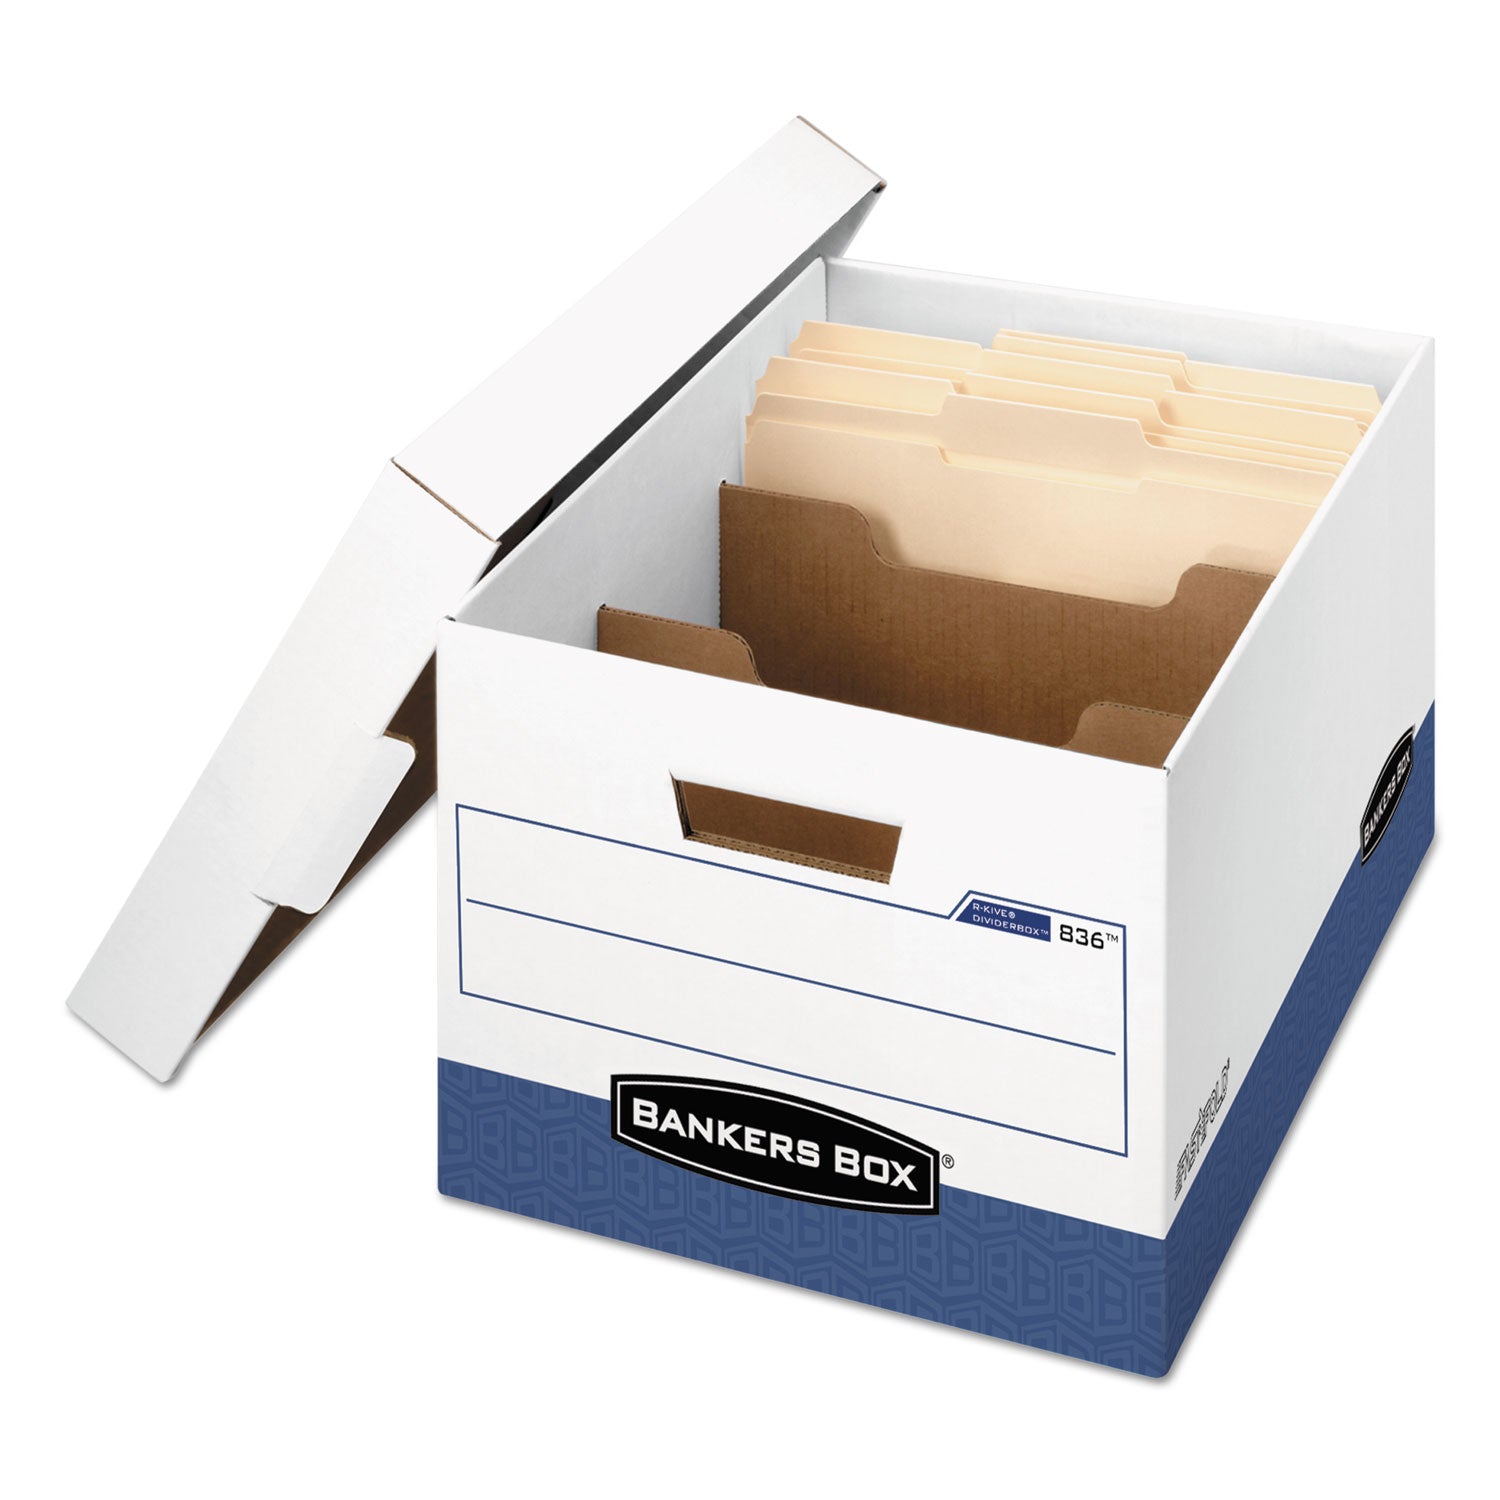 R-KIVE Heavy-Duty Storage Boxes with Dividers, Letter/Legal Files, 12.75" x 16.5" x 10.38", White/Blue, 12/Carton - 